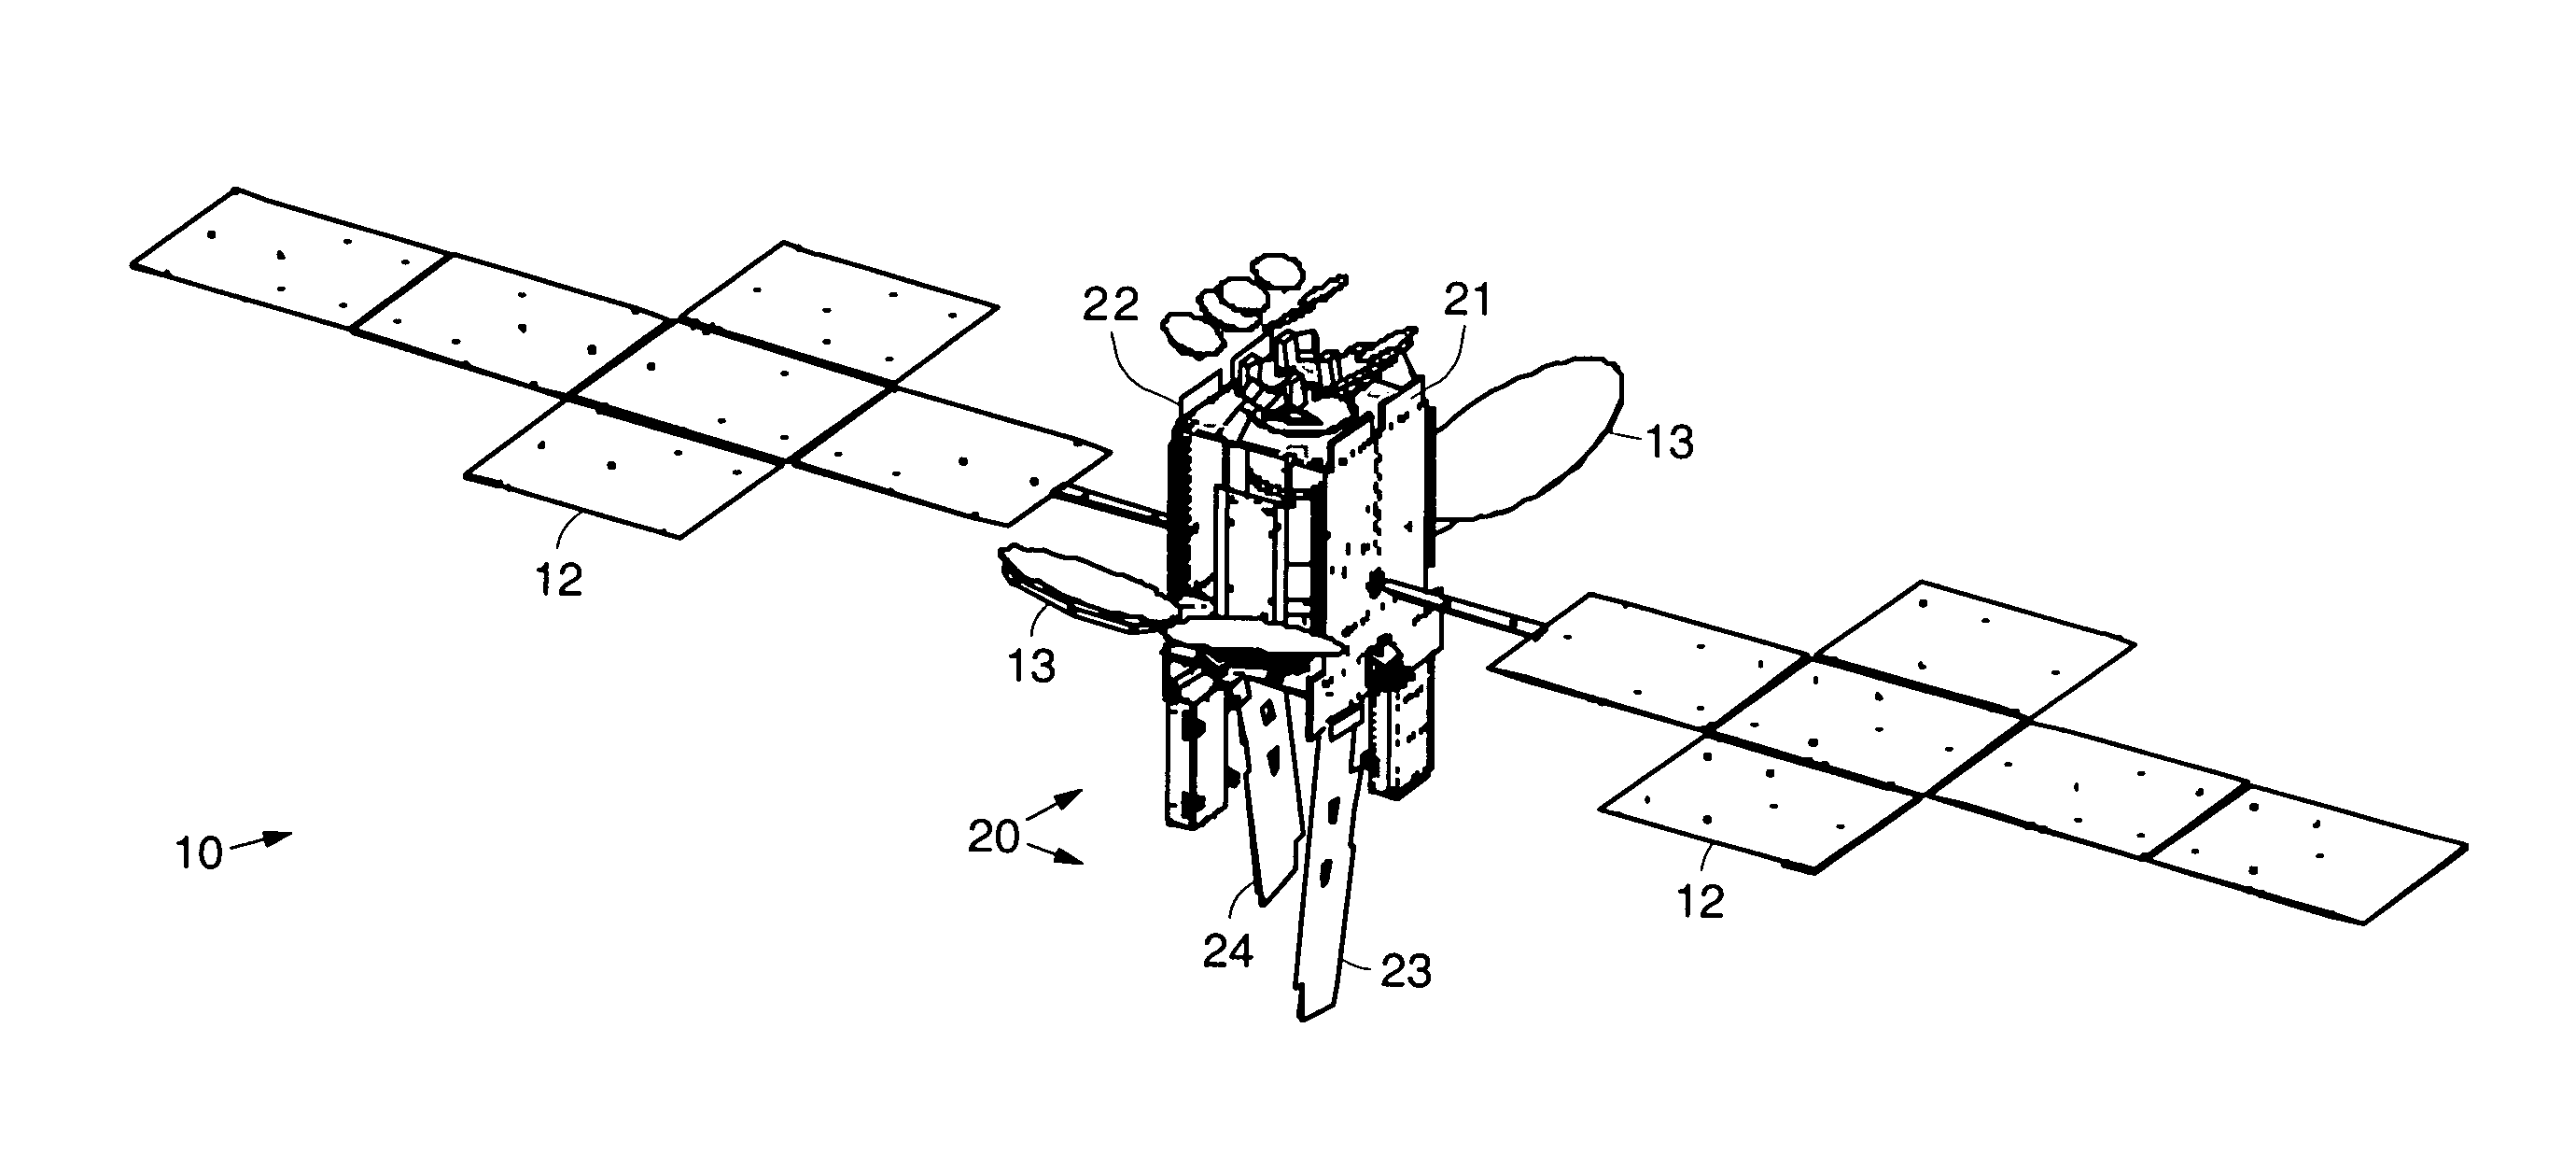 Two-sided deployable thermal radiator system and method